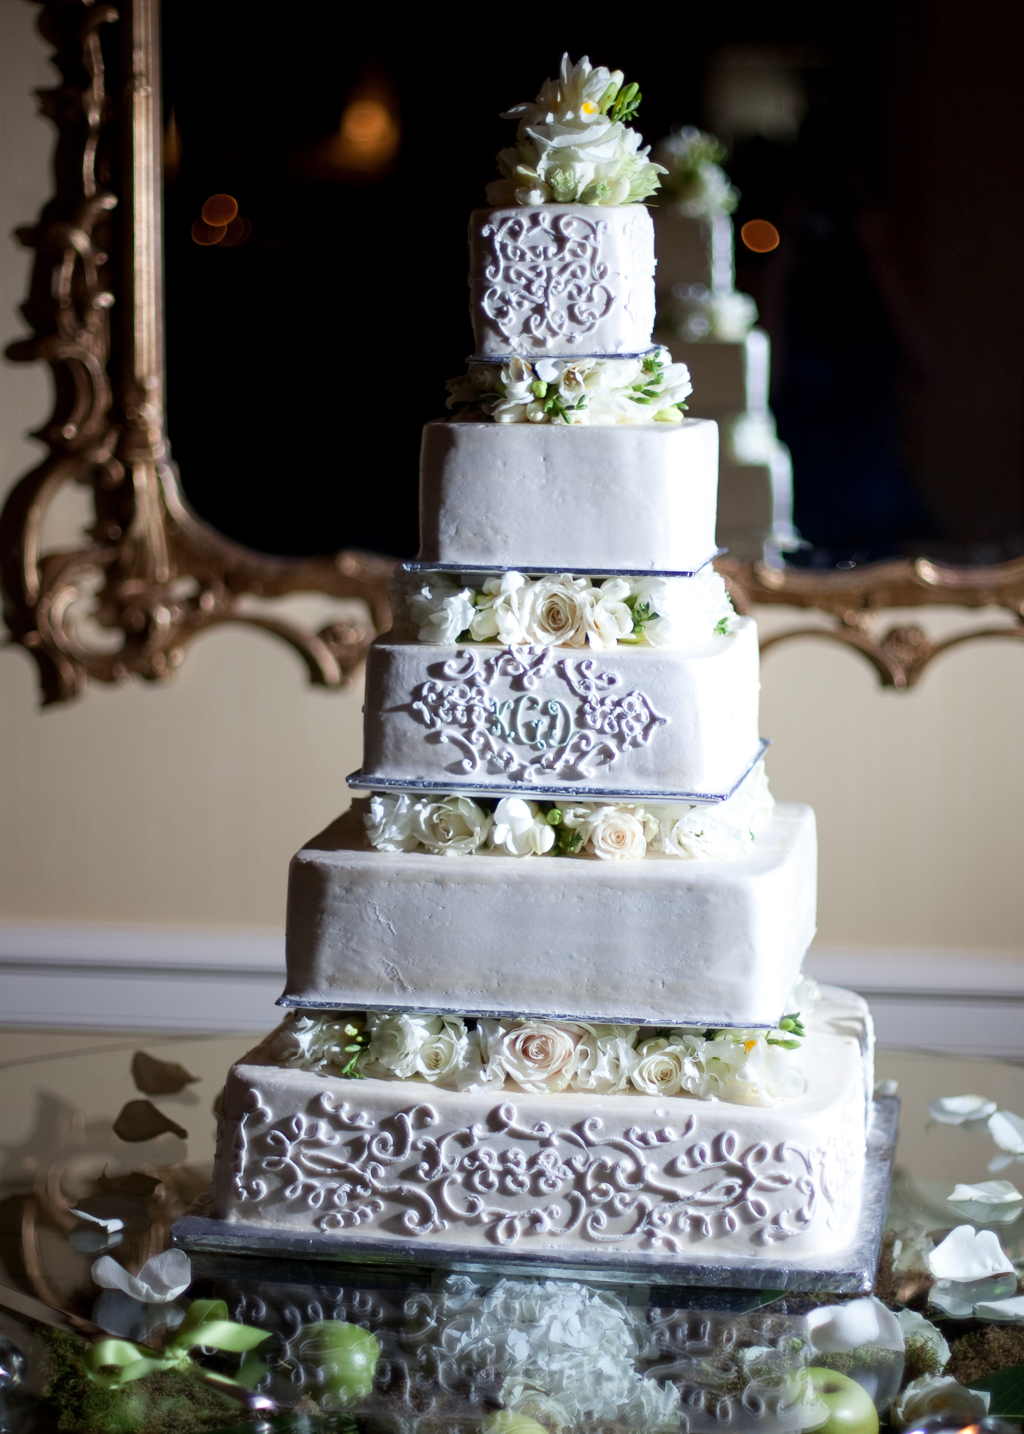 pretty 5 tier wedding cake with intricate icing design and ivory and green flowers